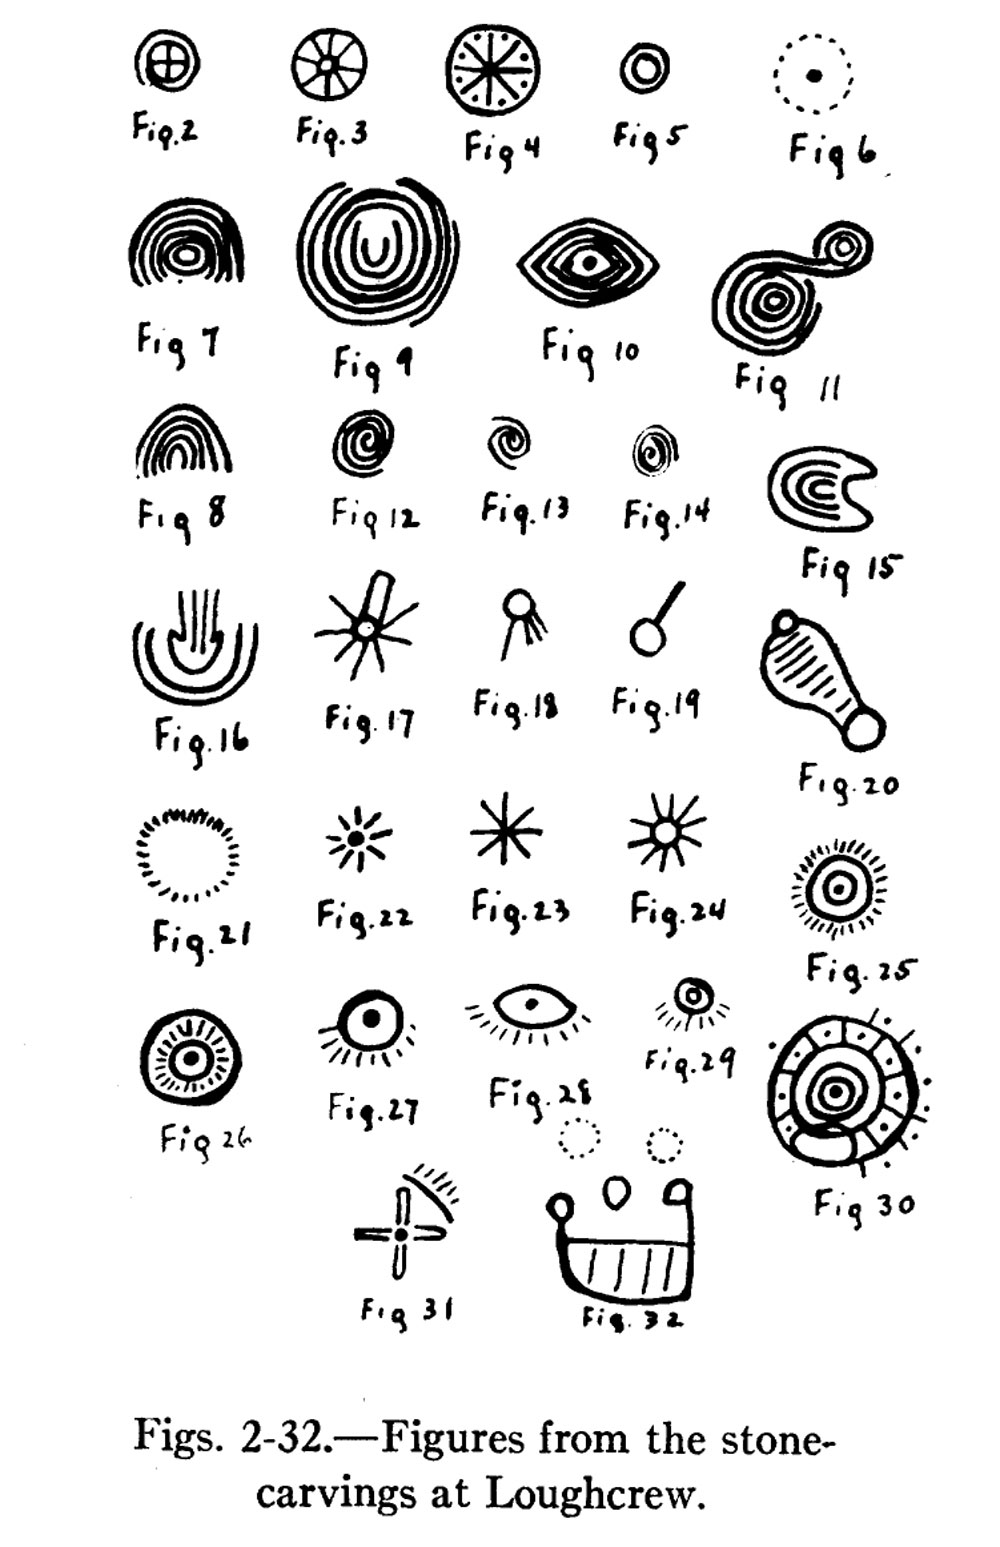 A table of the chief symbols encountered in the engraved art at Loughcrew, taken from the report produced by American anthropoligist George Blom in 1924.